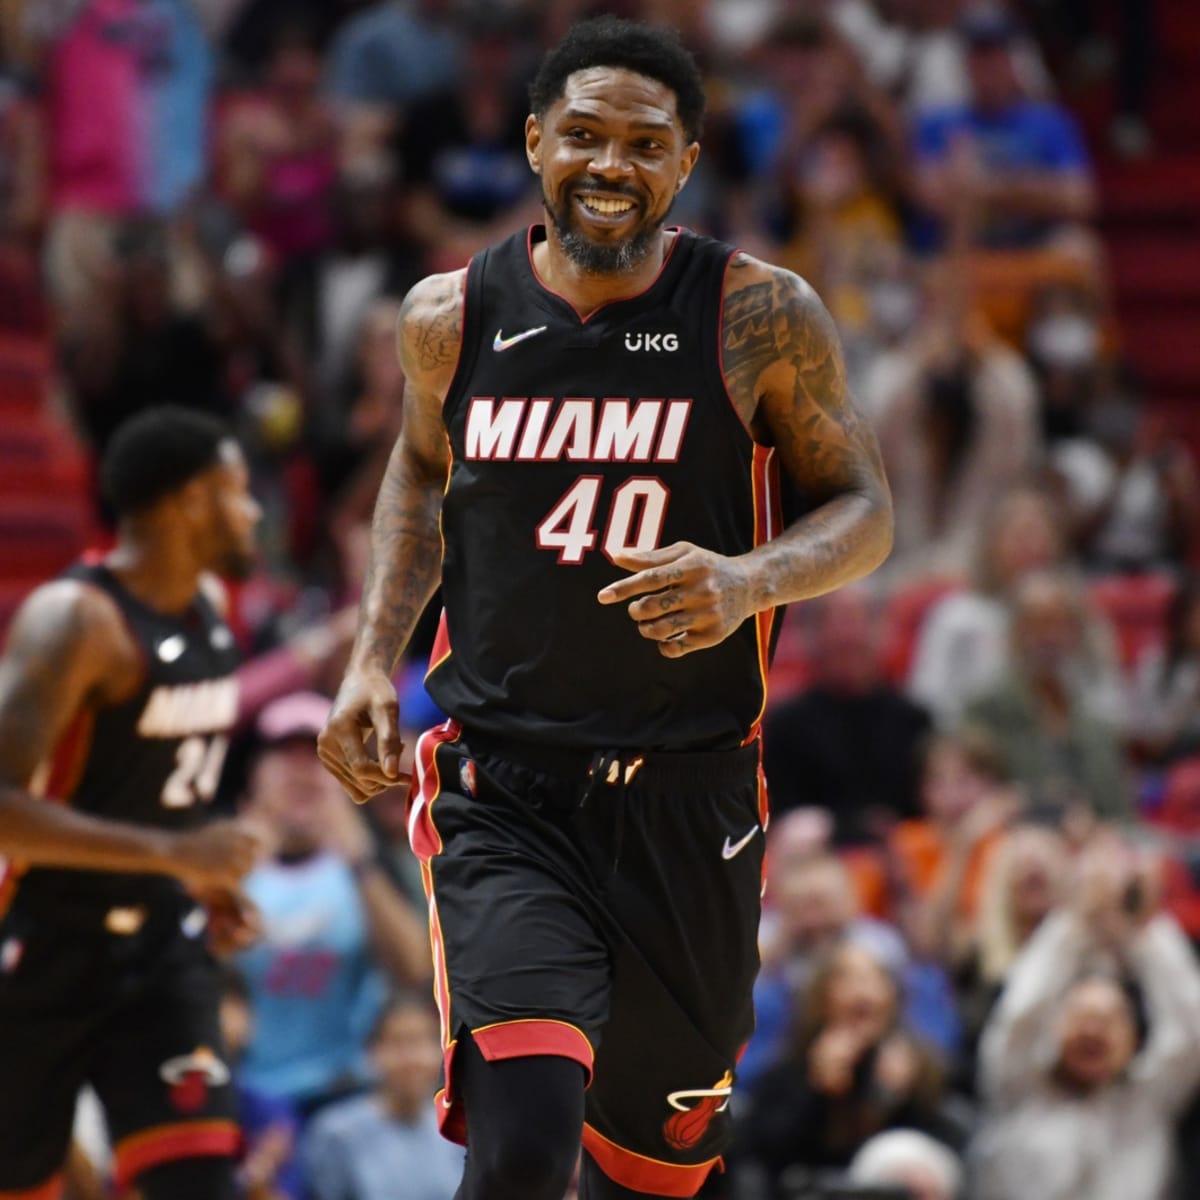 Miami Heat retire 'Vice' uniforms after years of dominating sales